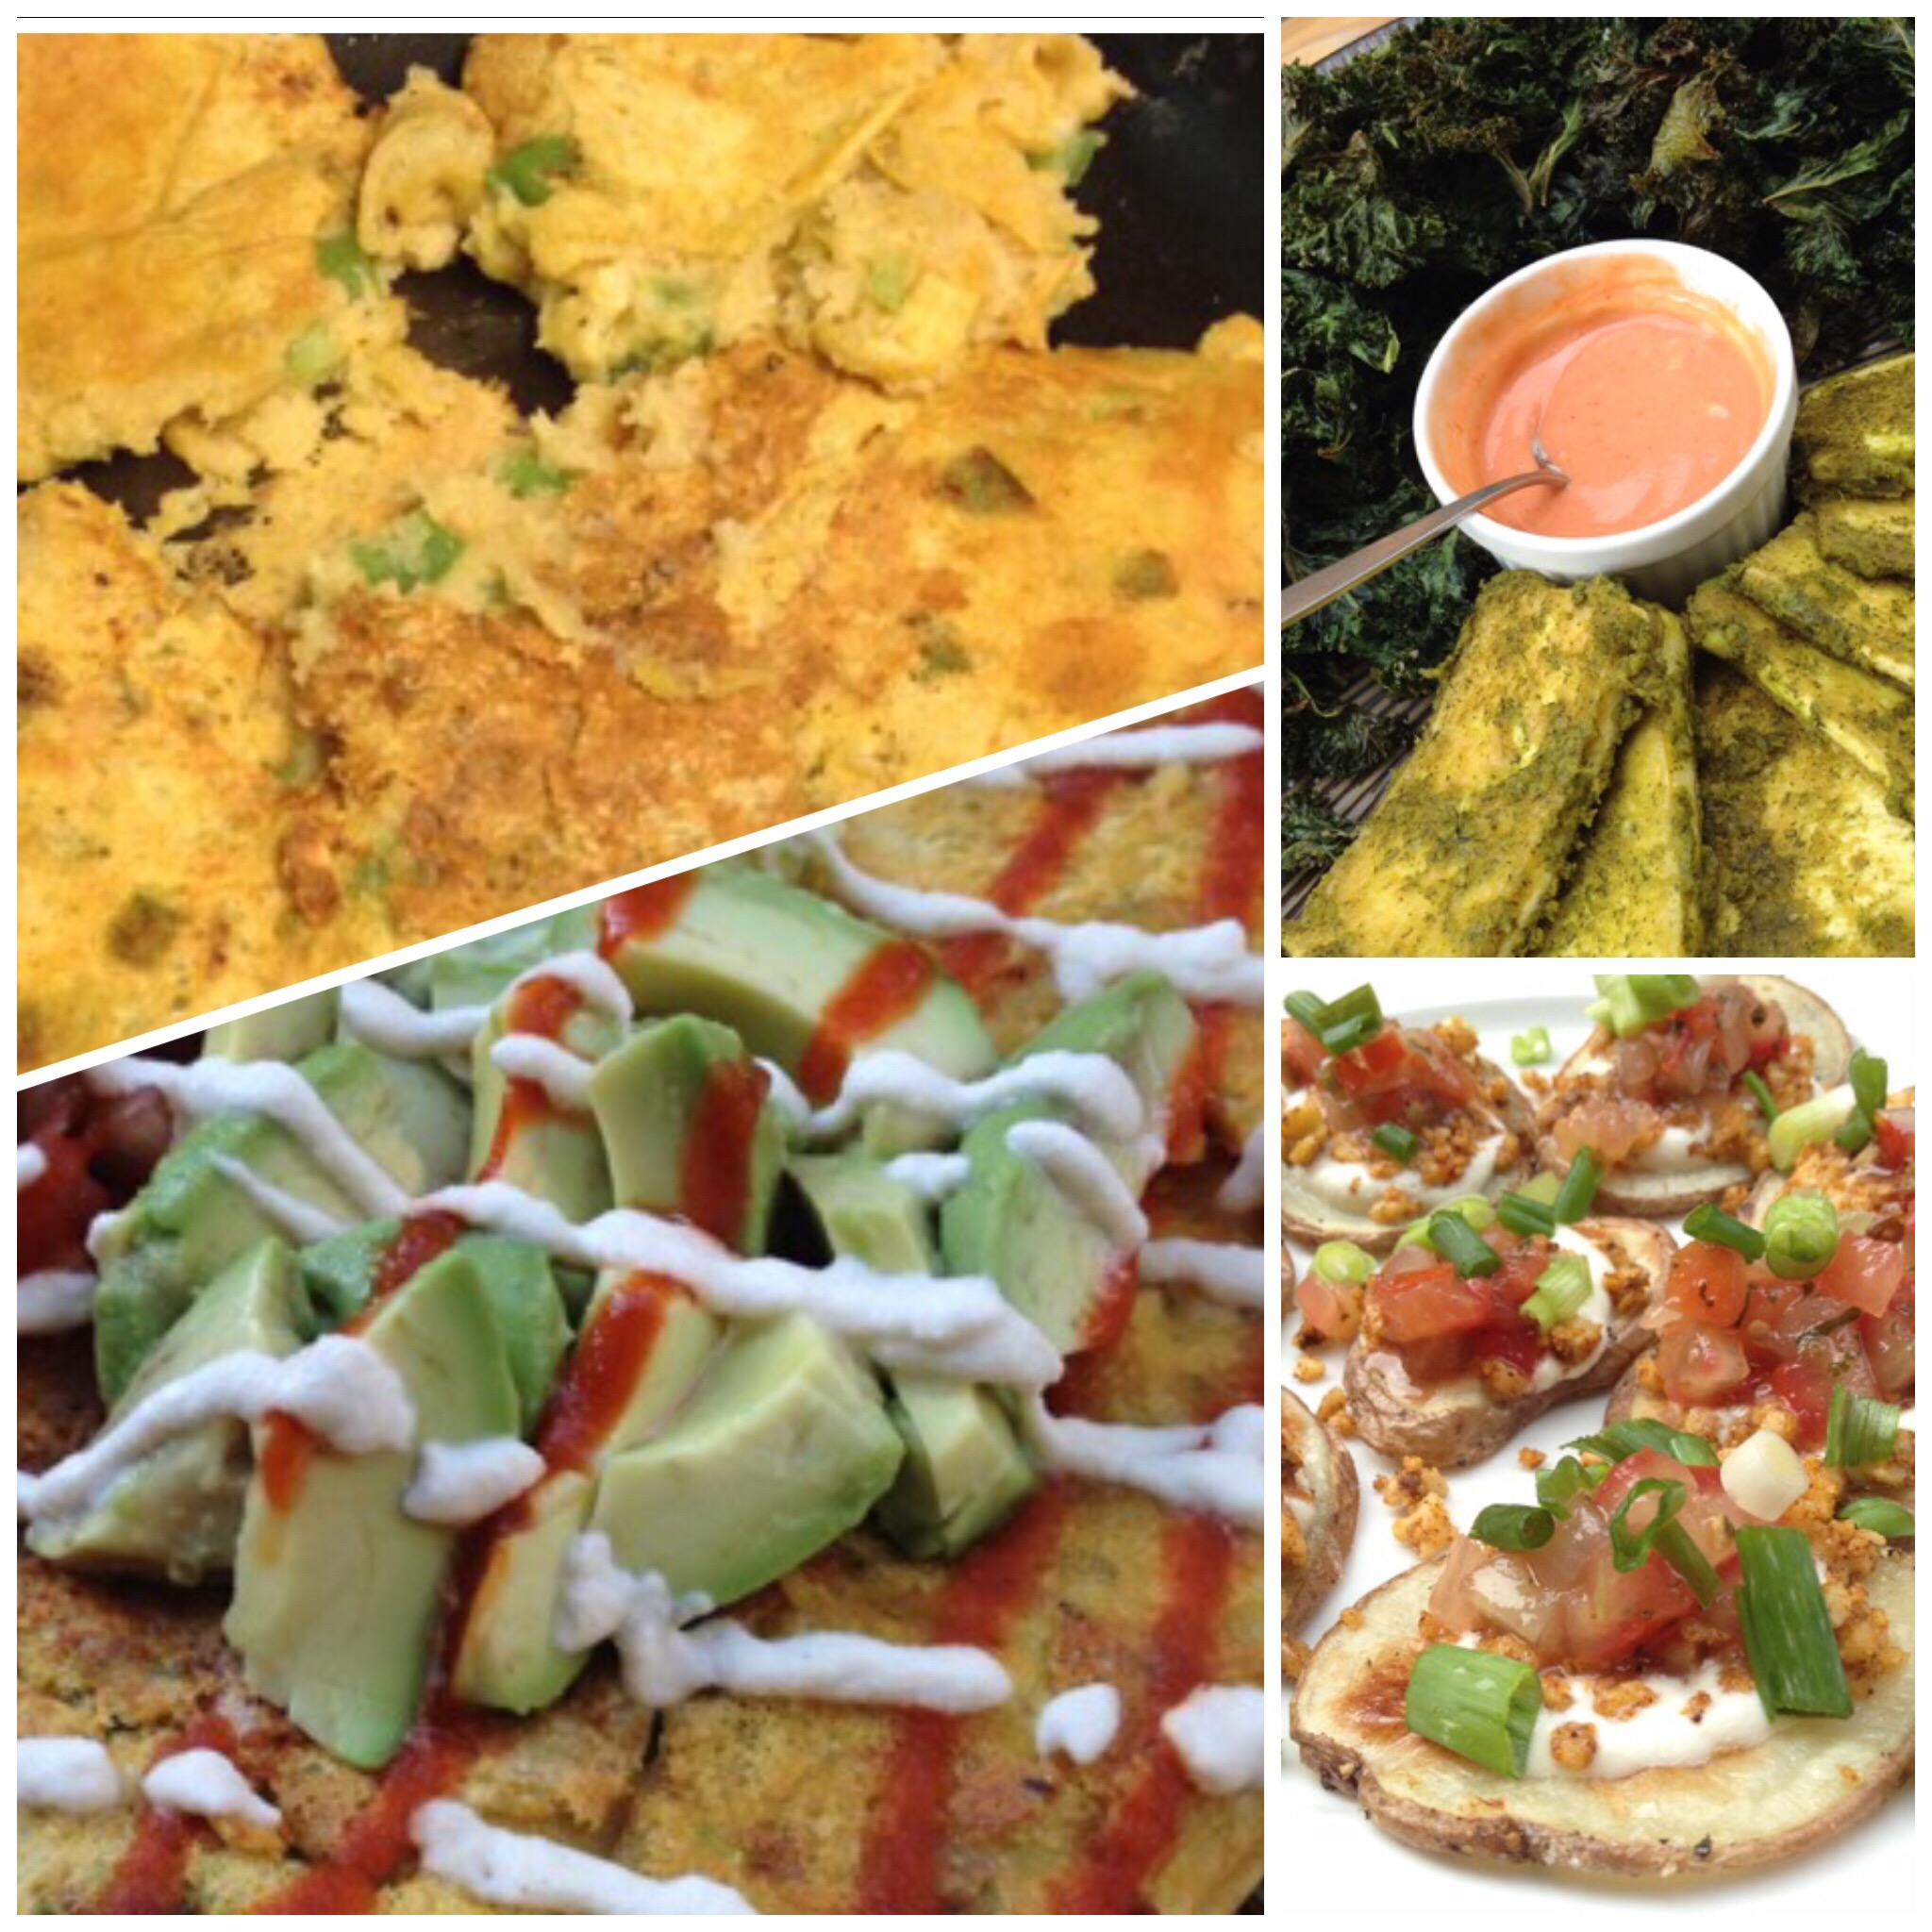 Review of the Jumbo chickpea pancake, lemon tofu and kale chips, and Taco Fiesta chips